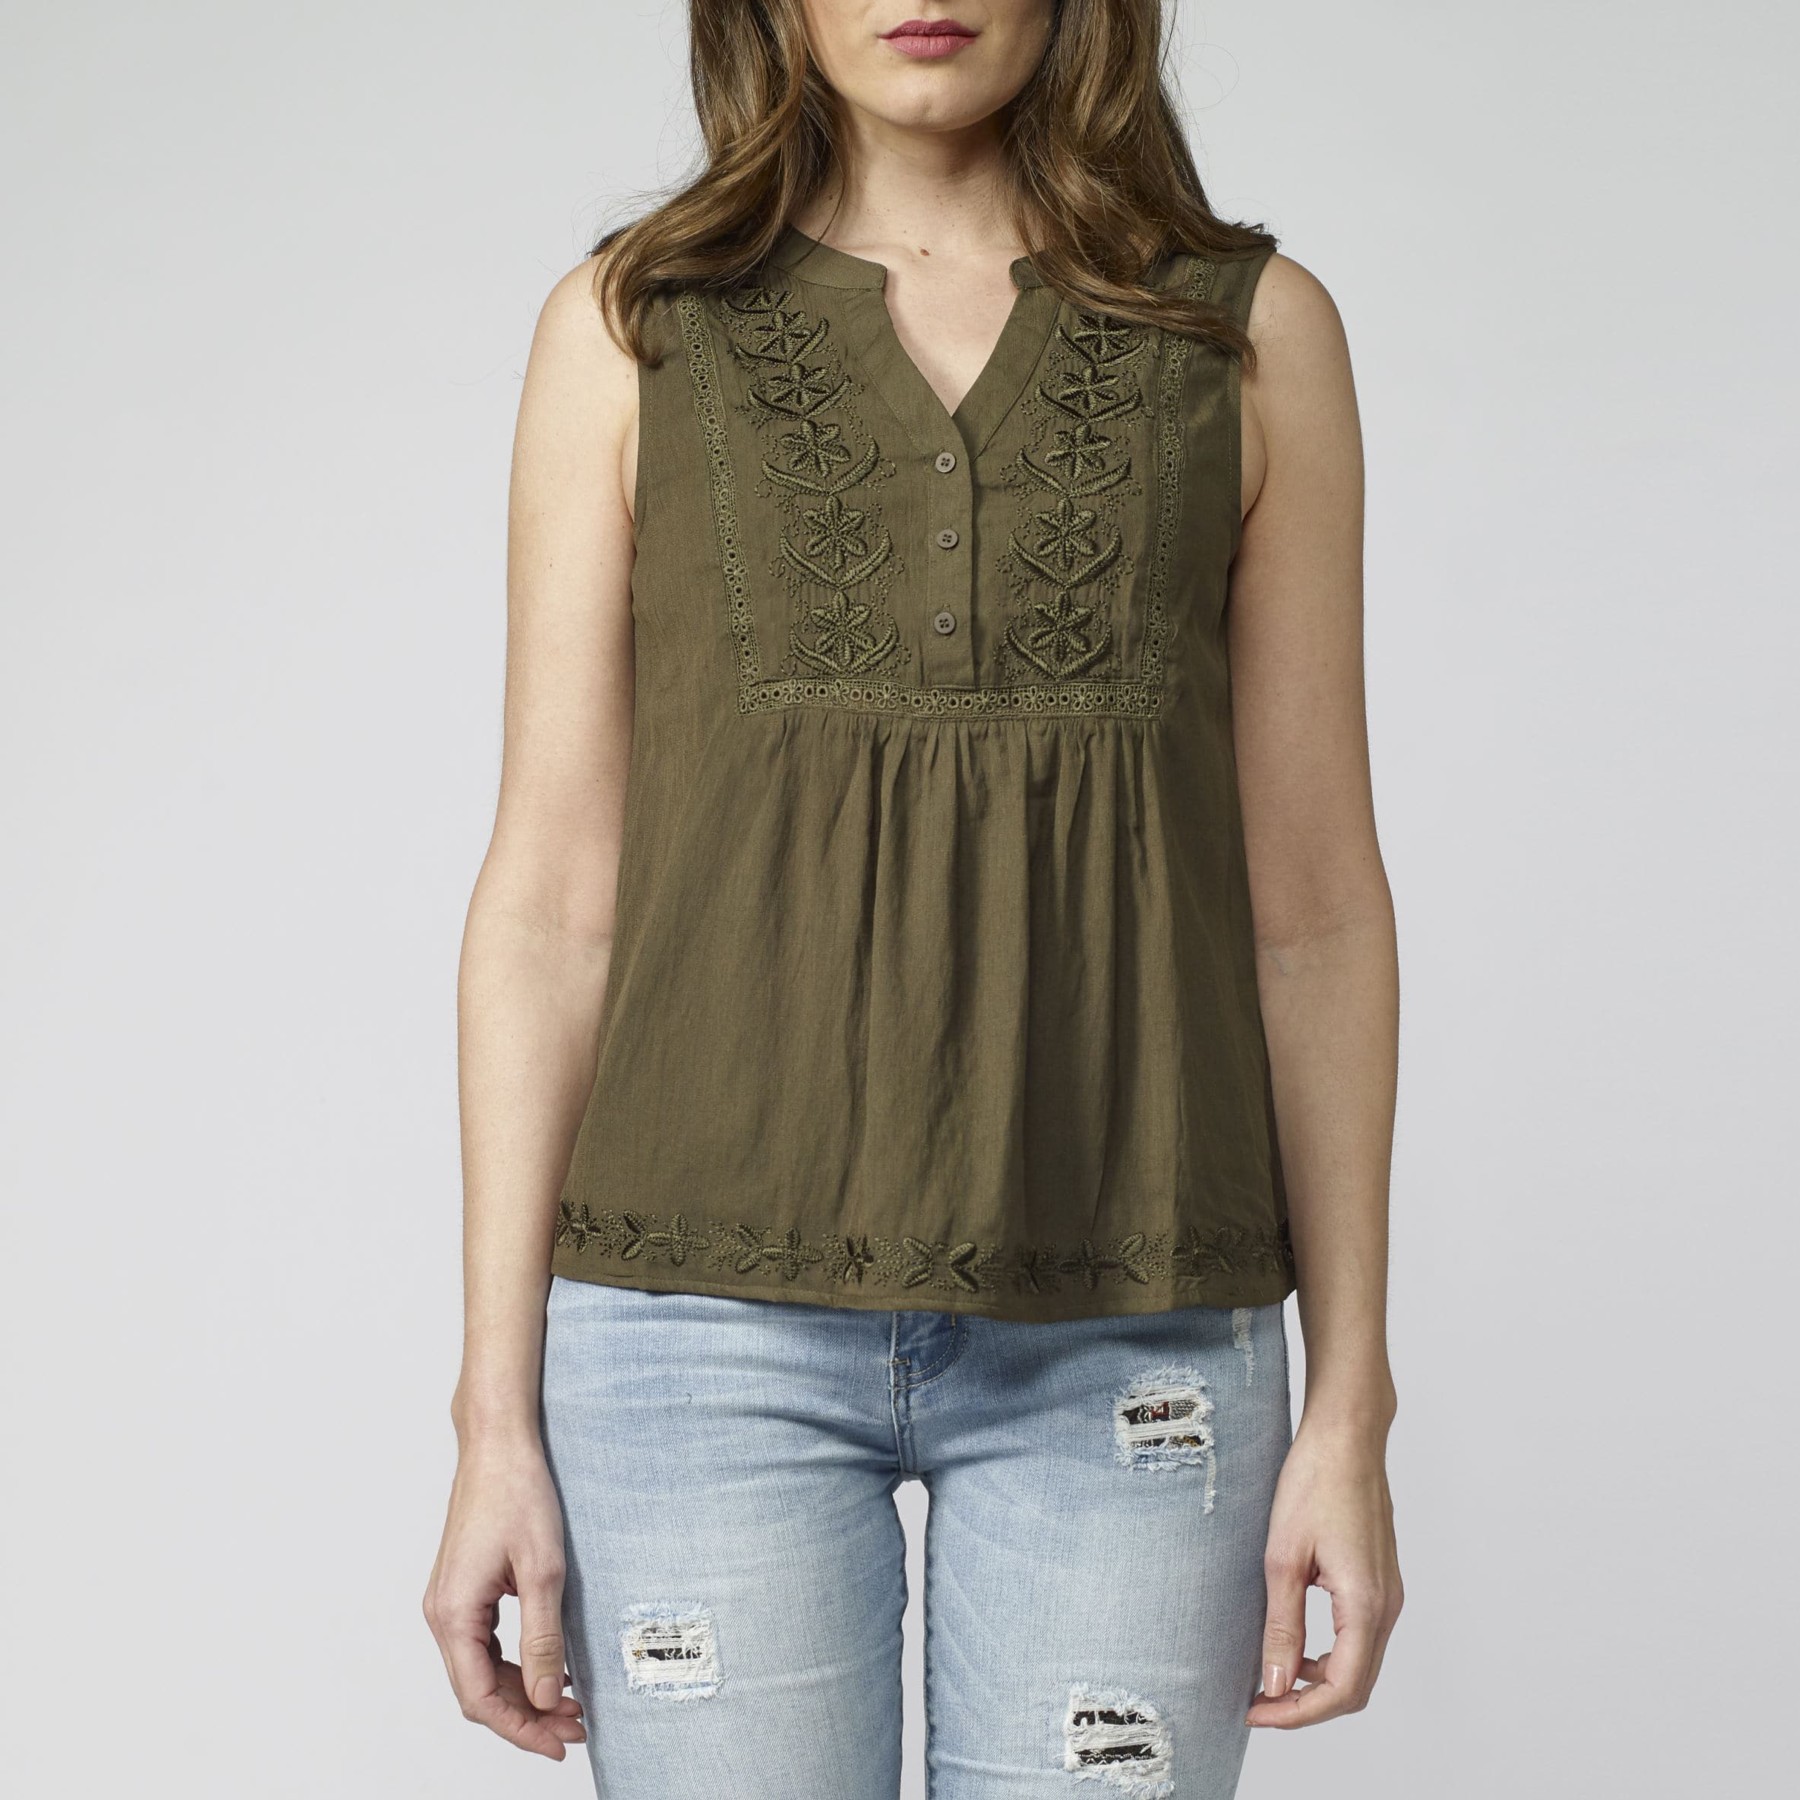 Flowing Blouse with V-neckline, Sleeveless with Embroidered Detail and Lace on the Front in Khaki Color for Women